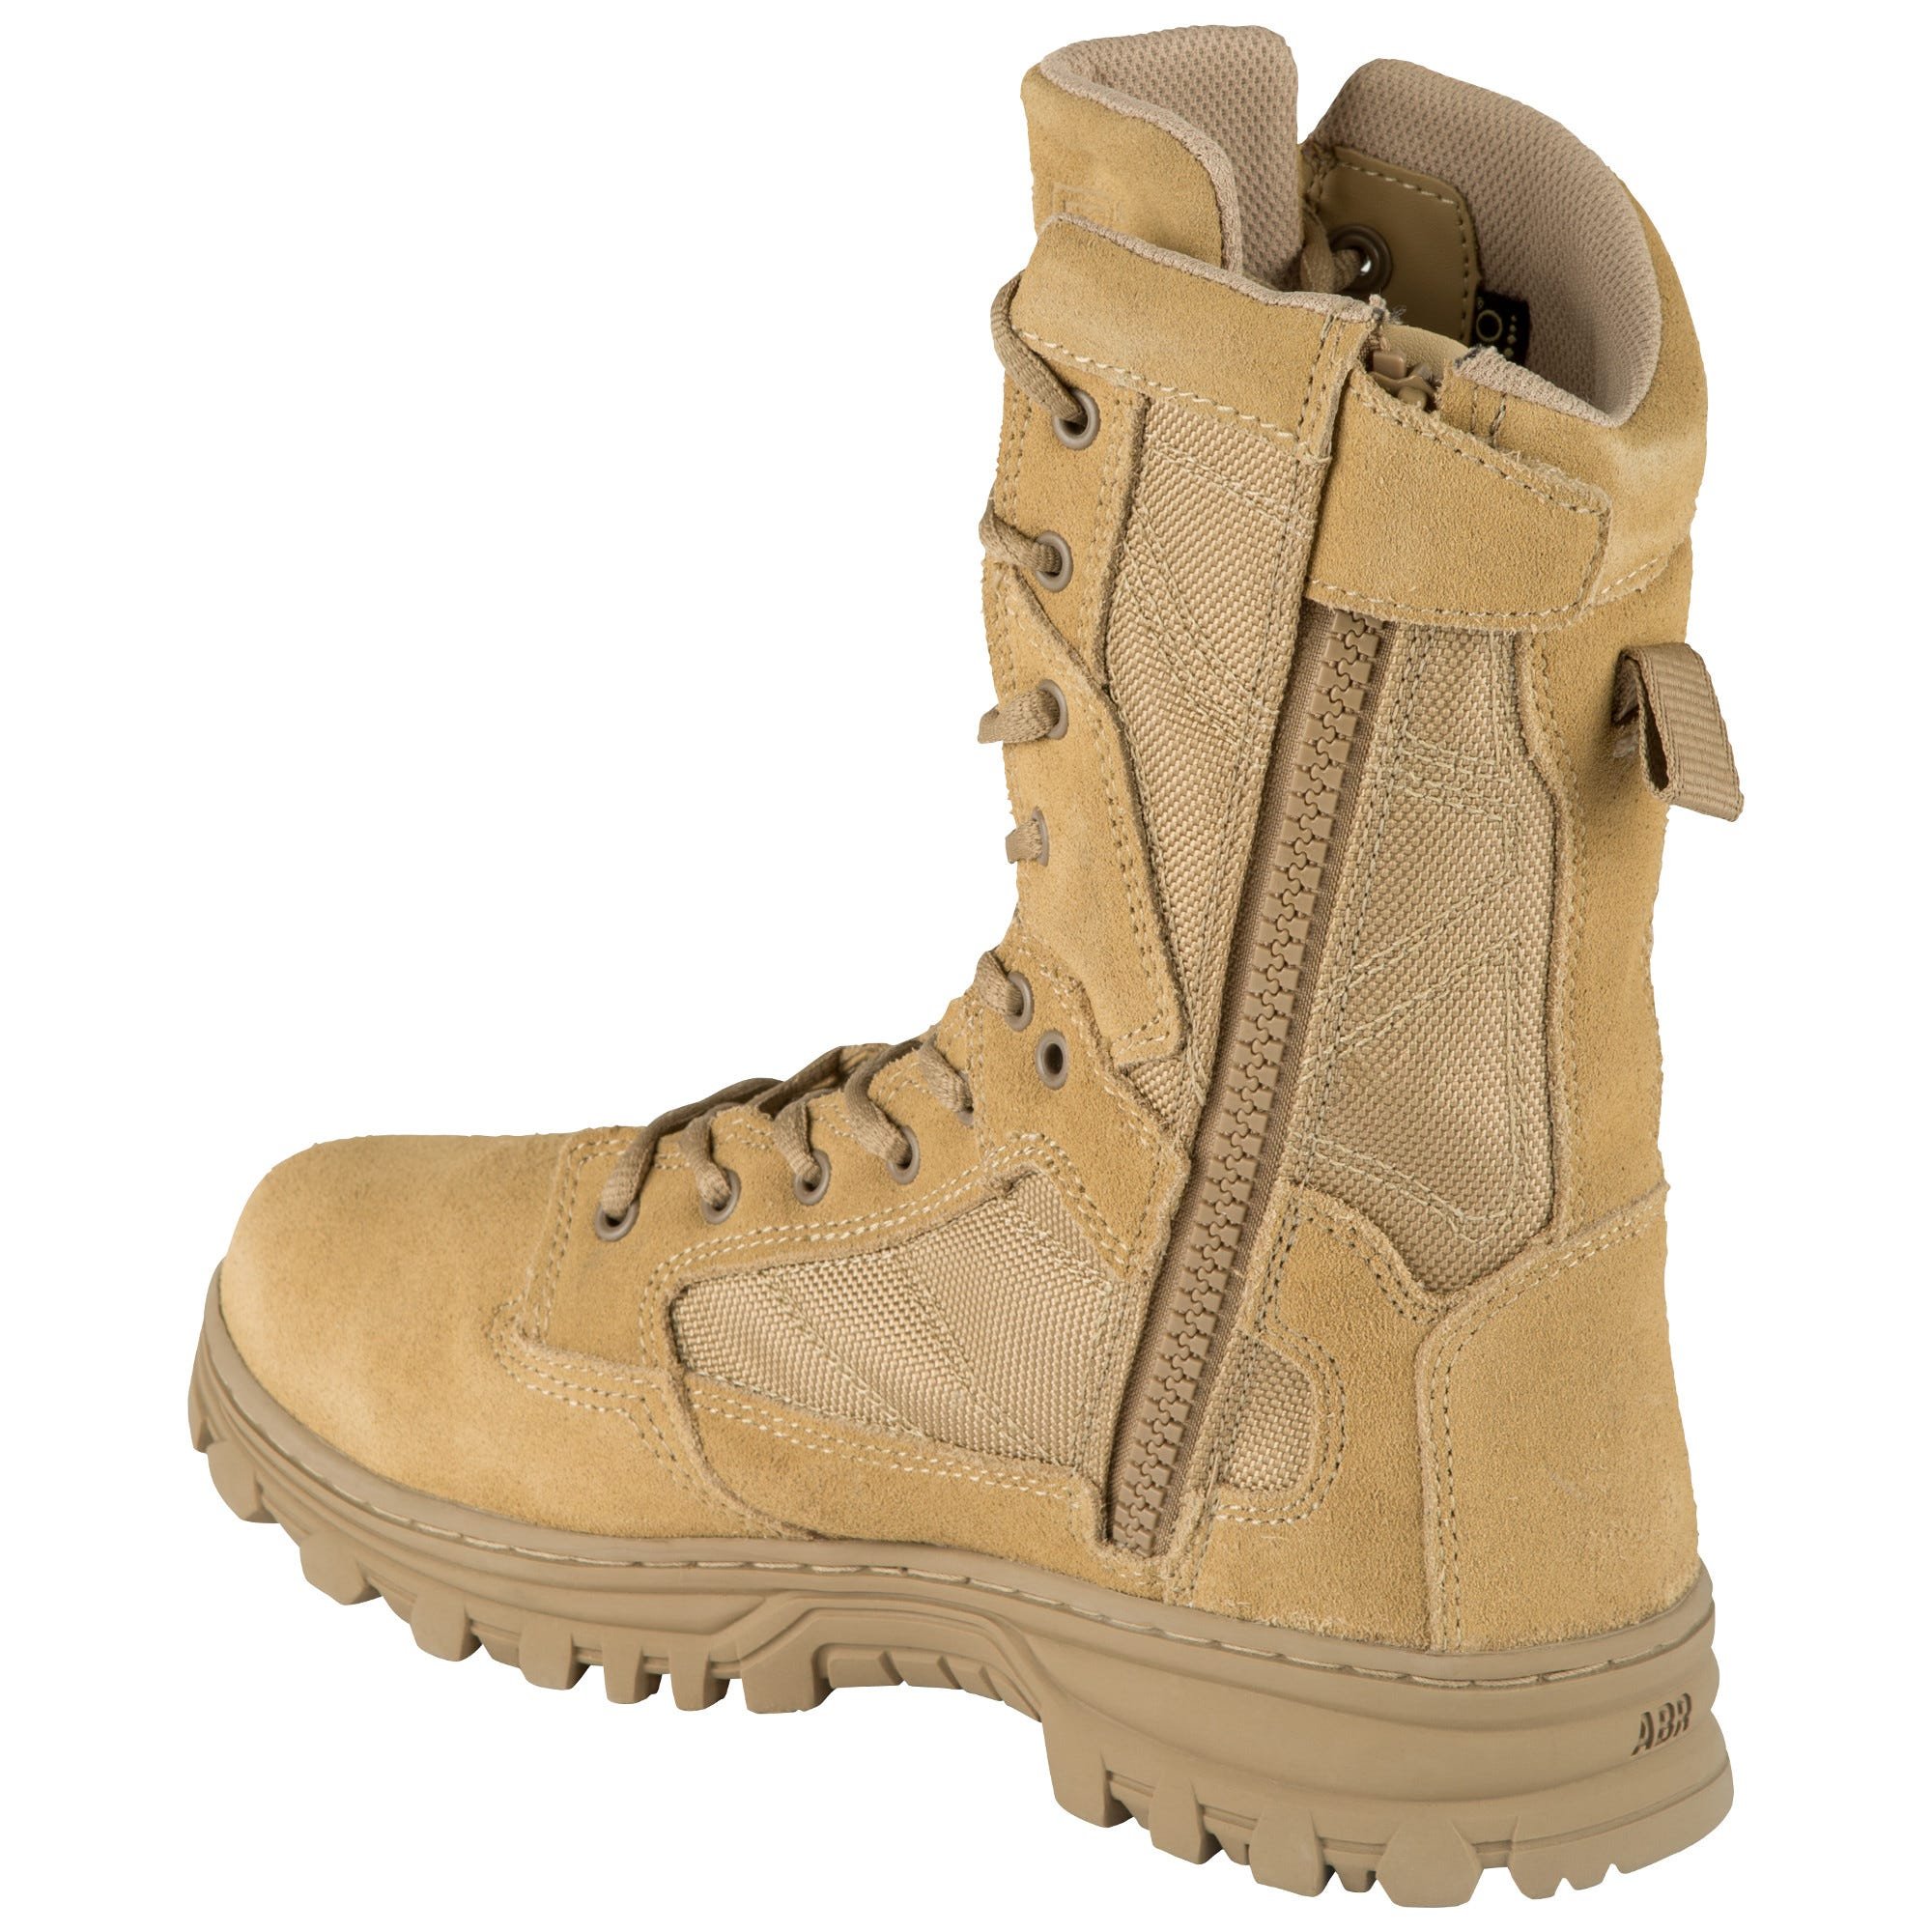 5.11 Work Gear EVO 8-Inch Waterproof Boots, Oil/Slip-Resistant, OrthoLite Insole, Coyote, 6/Regular, Style 12347 - image 2 of 4